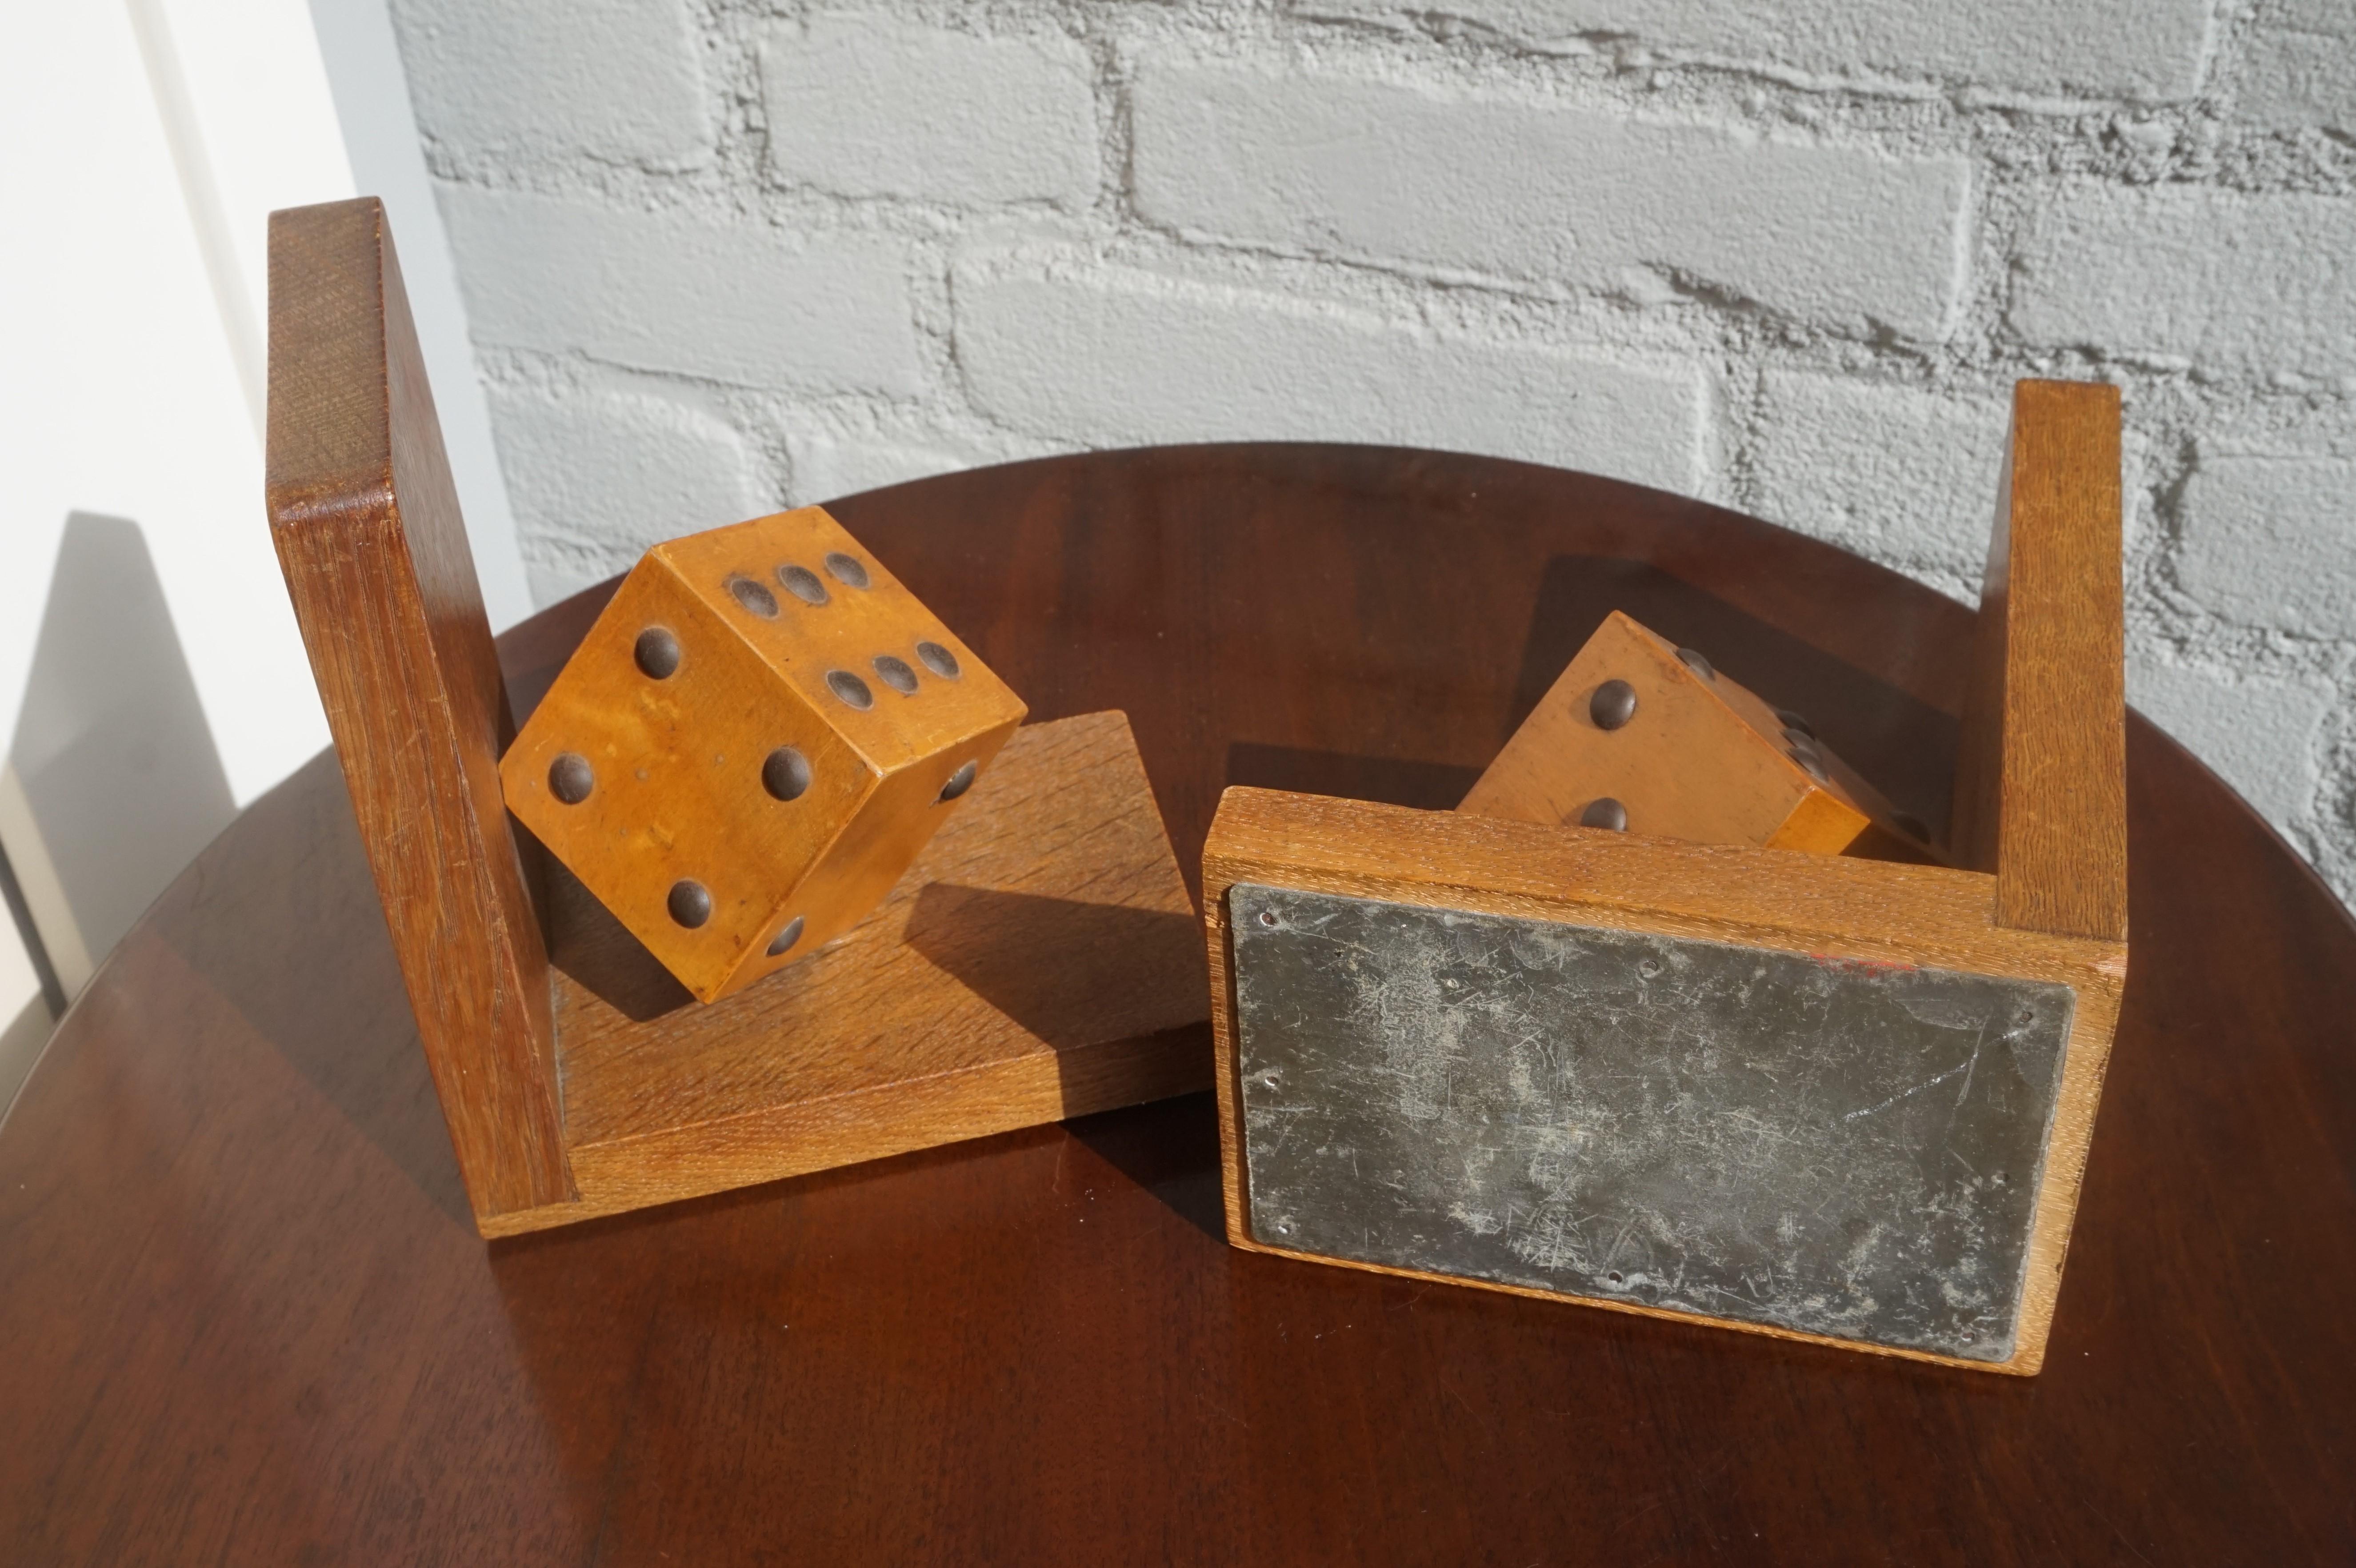 Arts & Crafts Pair of Wooden Dice with Metal Nails Bookends for The Gamblers 2